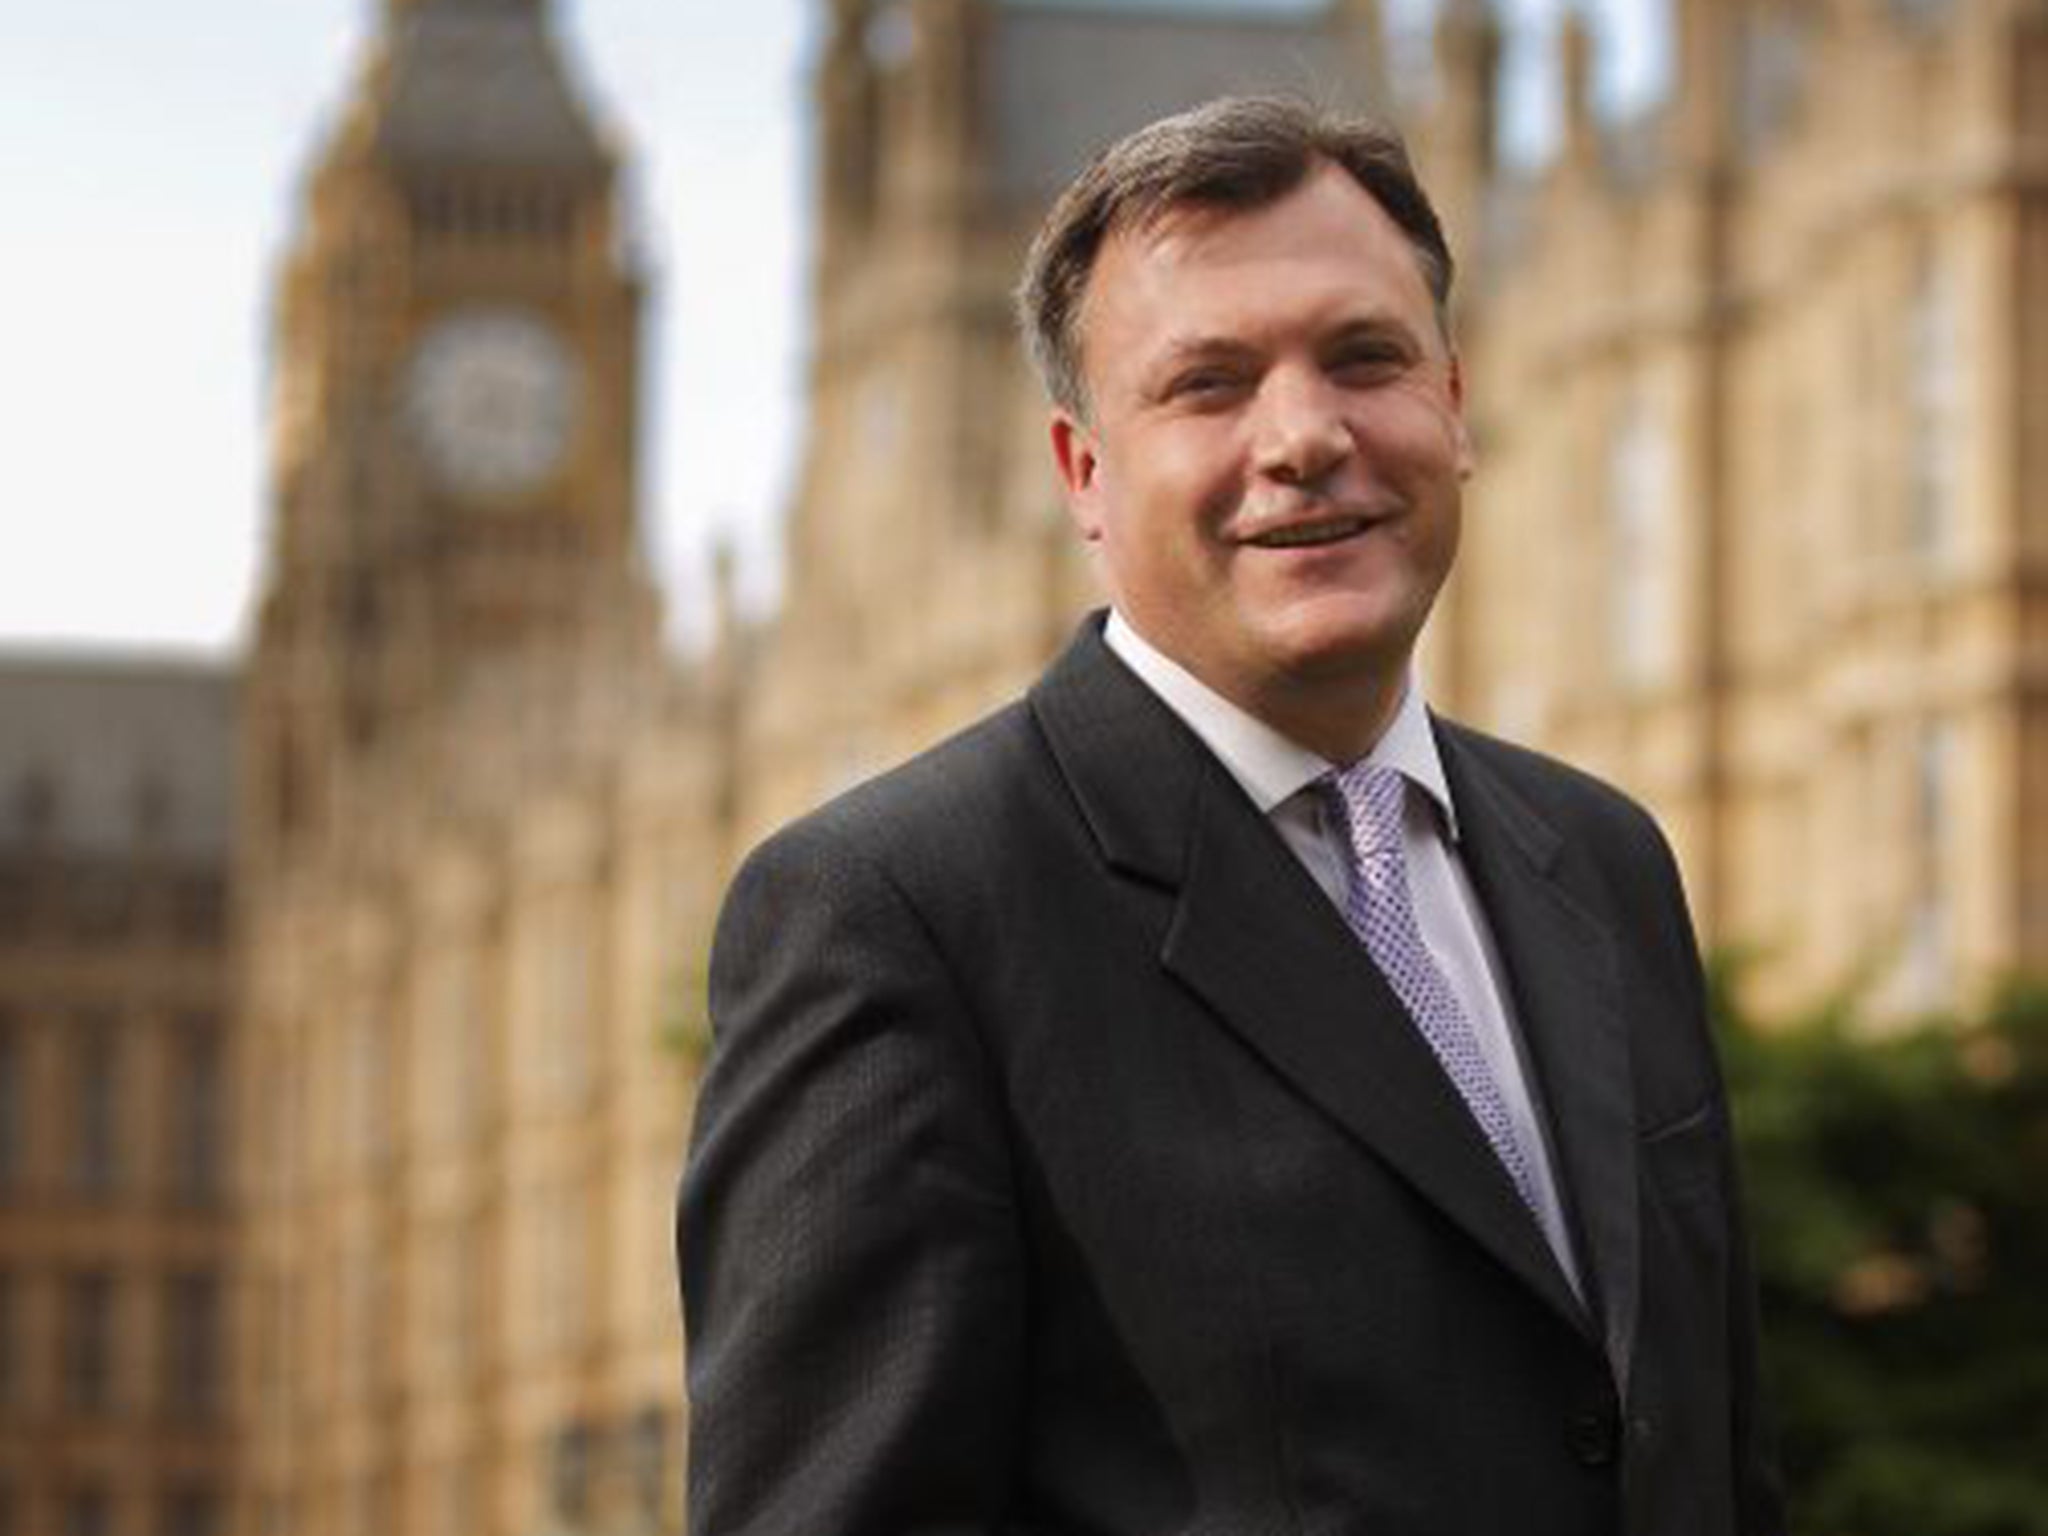 In his Newsnight interview, Ed Balls was unable to remember the name of any of his own business advisers